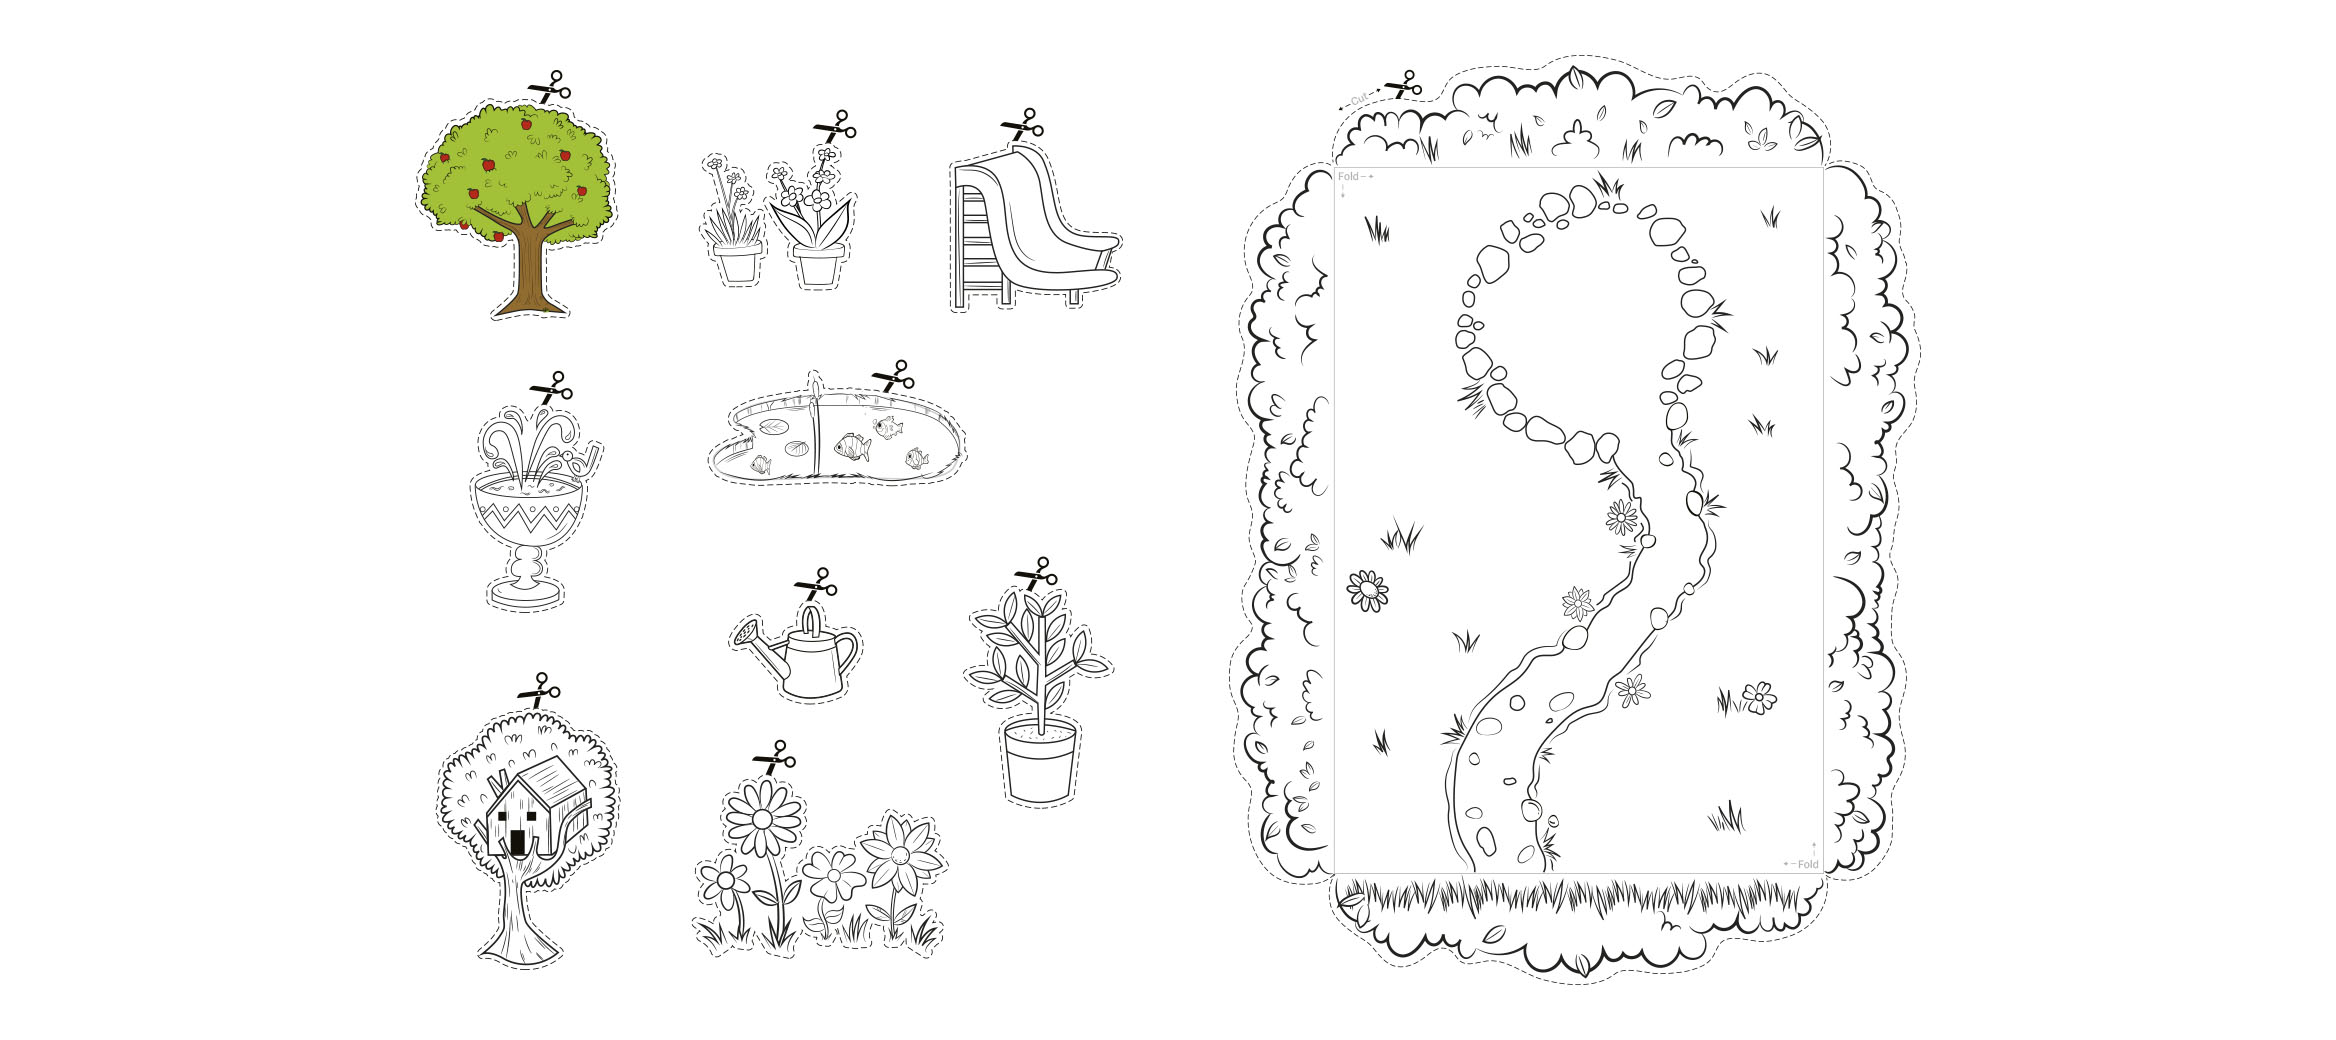 Help your little one cut out and create their own garden! Don’t forget to add a splash of colour to bring it to life!